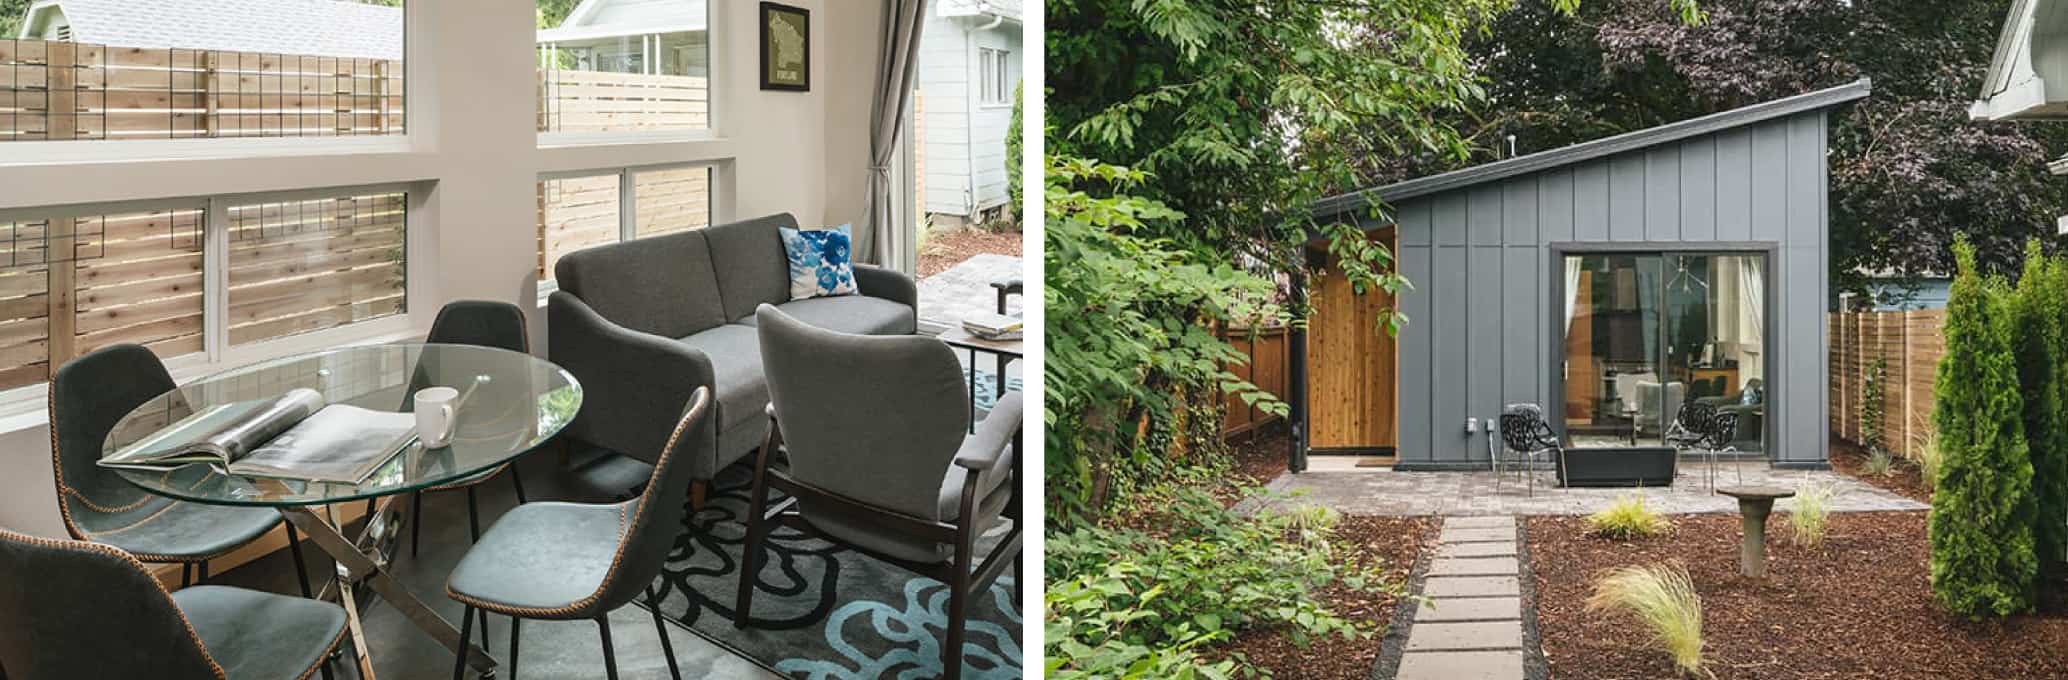 split image showing the interior of an accessory dwelling unit next to an image of the exterior of the building